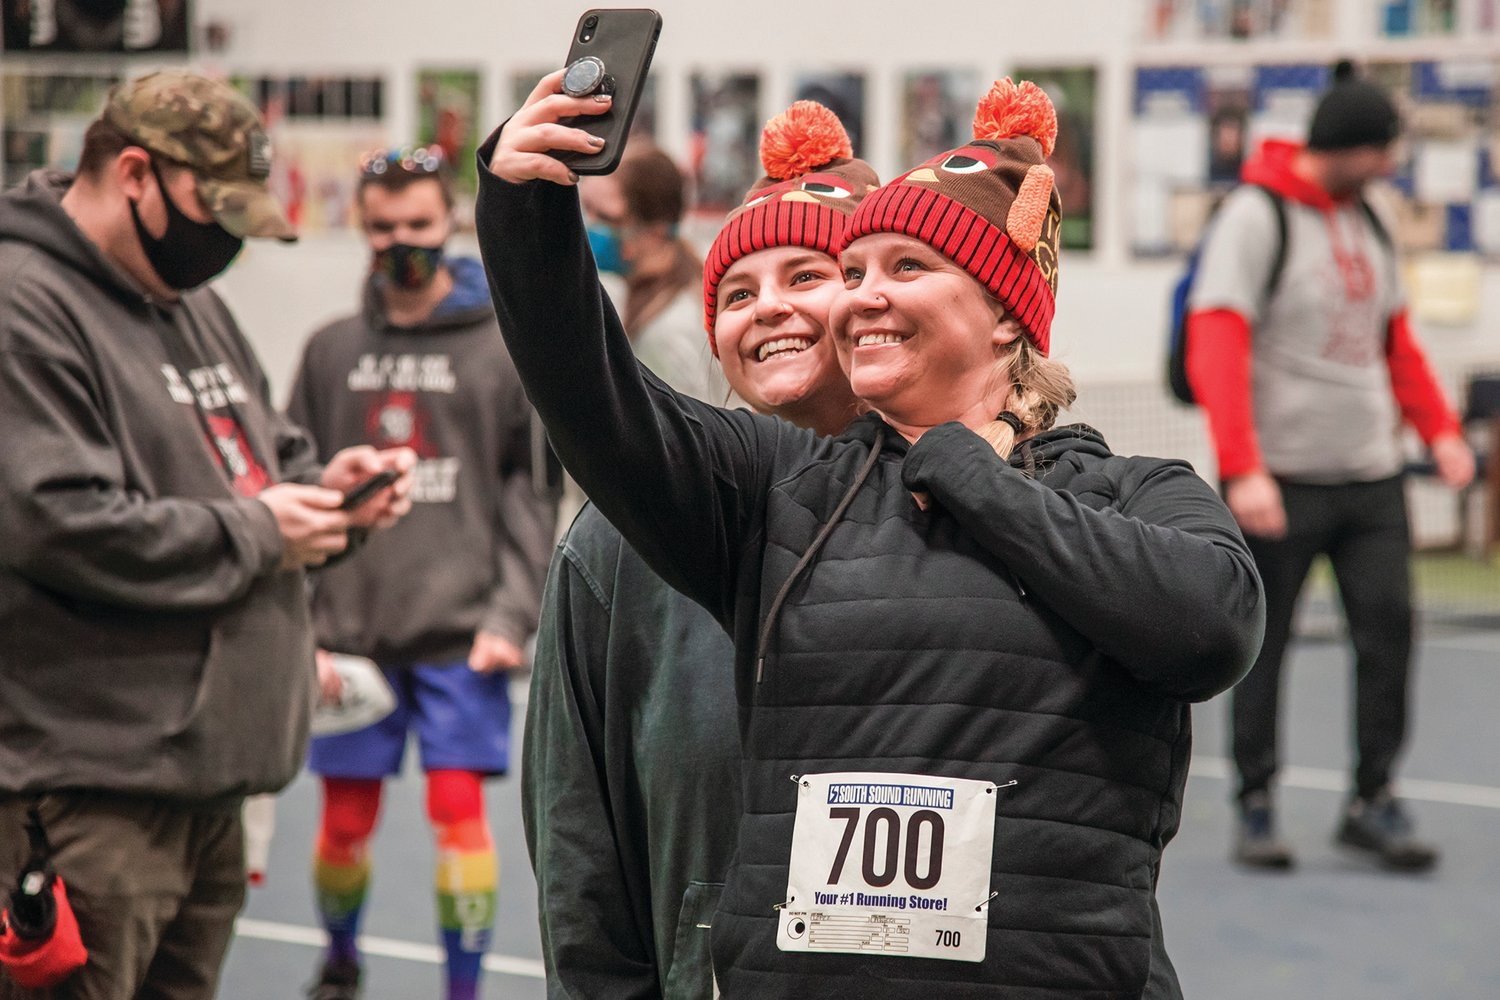 The Thorbeckes Athletic Performance Turkey Trot, presented by Althauser Rayan Abbarno, LLP takes place every Thanksgiving morning and benefits the Boys and Girls Club of Lewis County and the Chehalis Foundation. Stay tuned for more information.